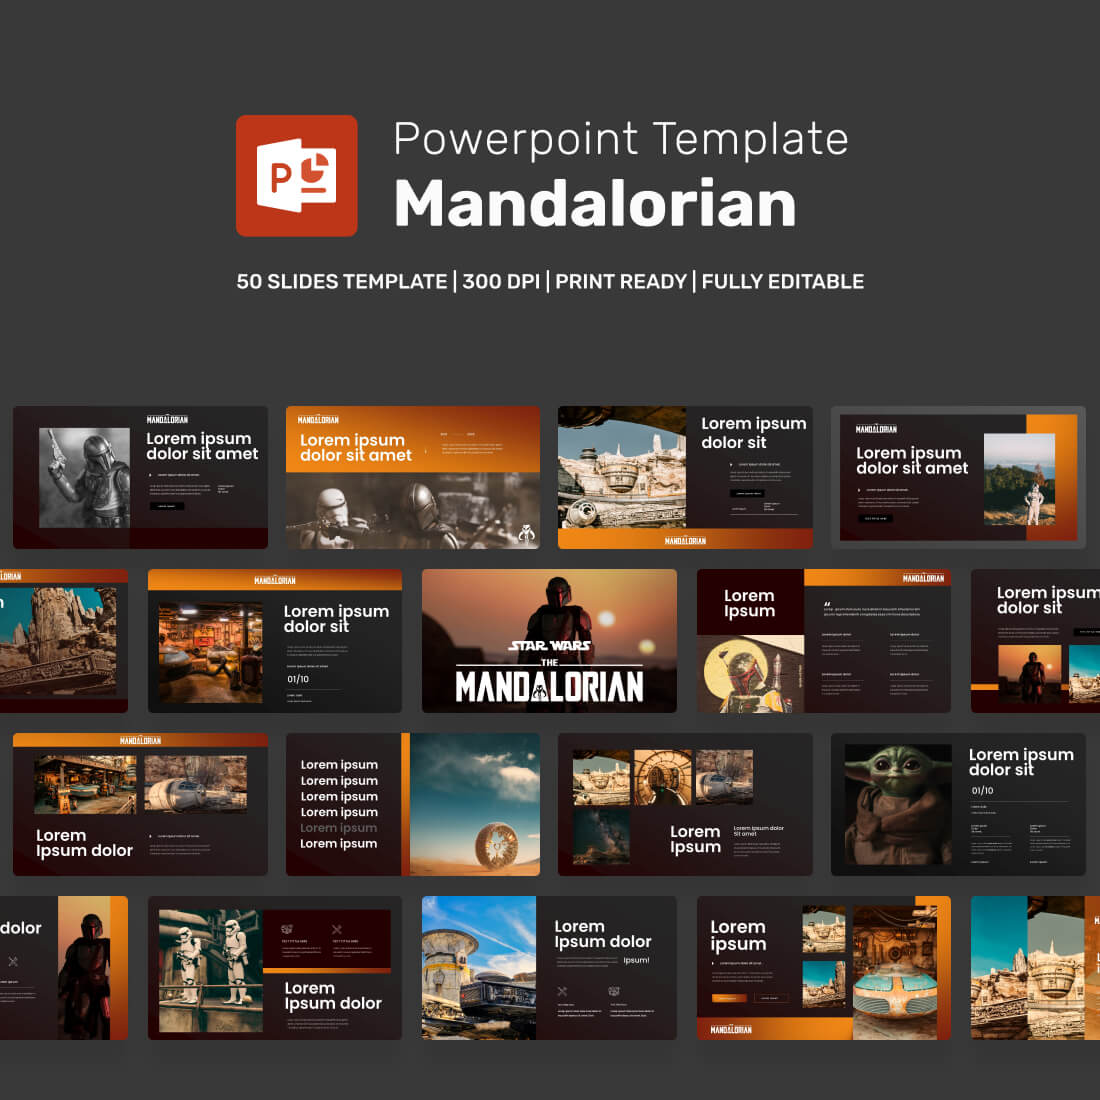 Mandalorian Star Wars Powerpoint Template cover image.